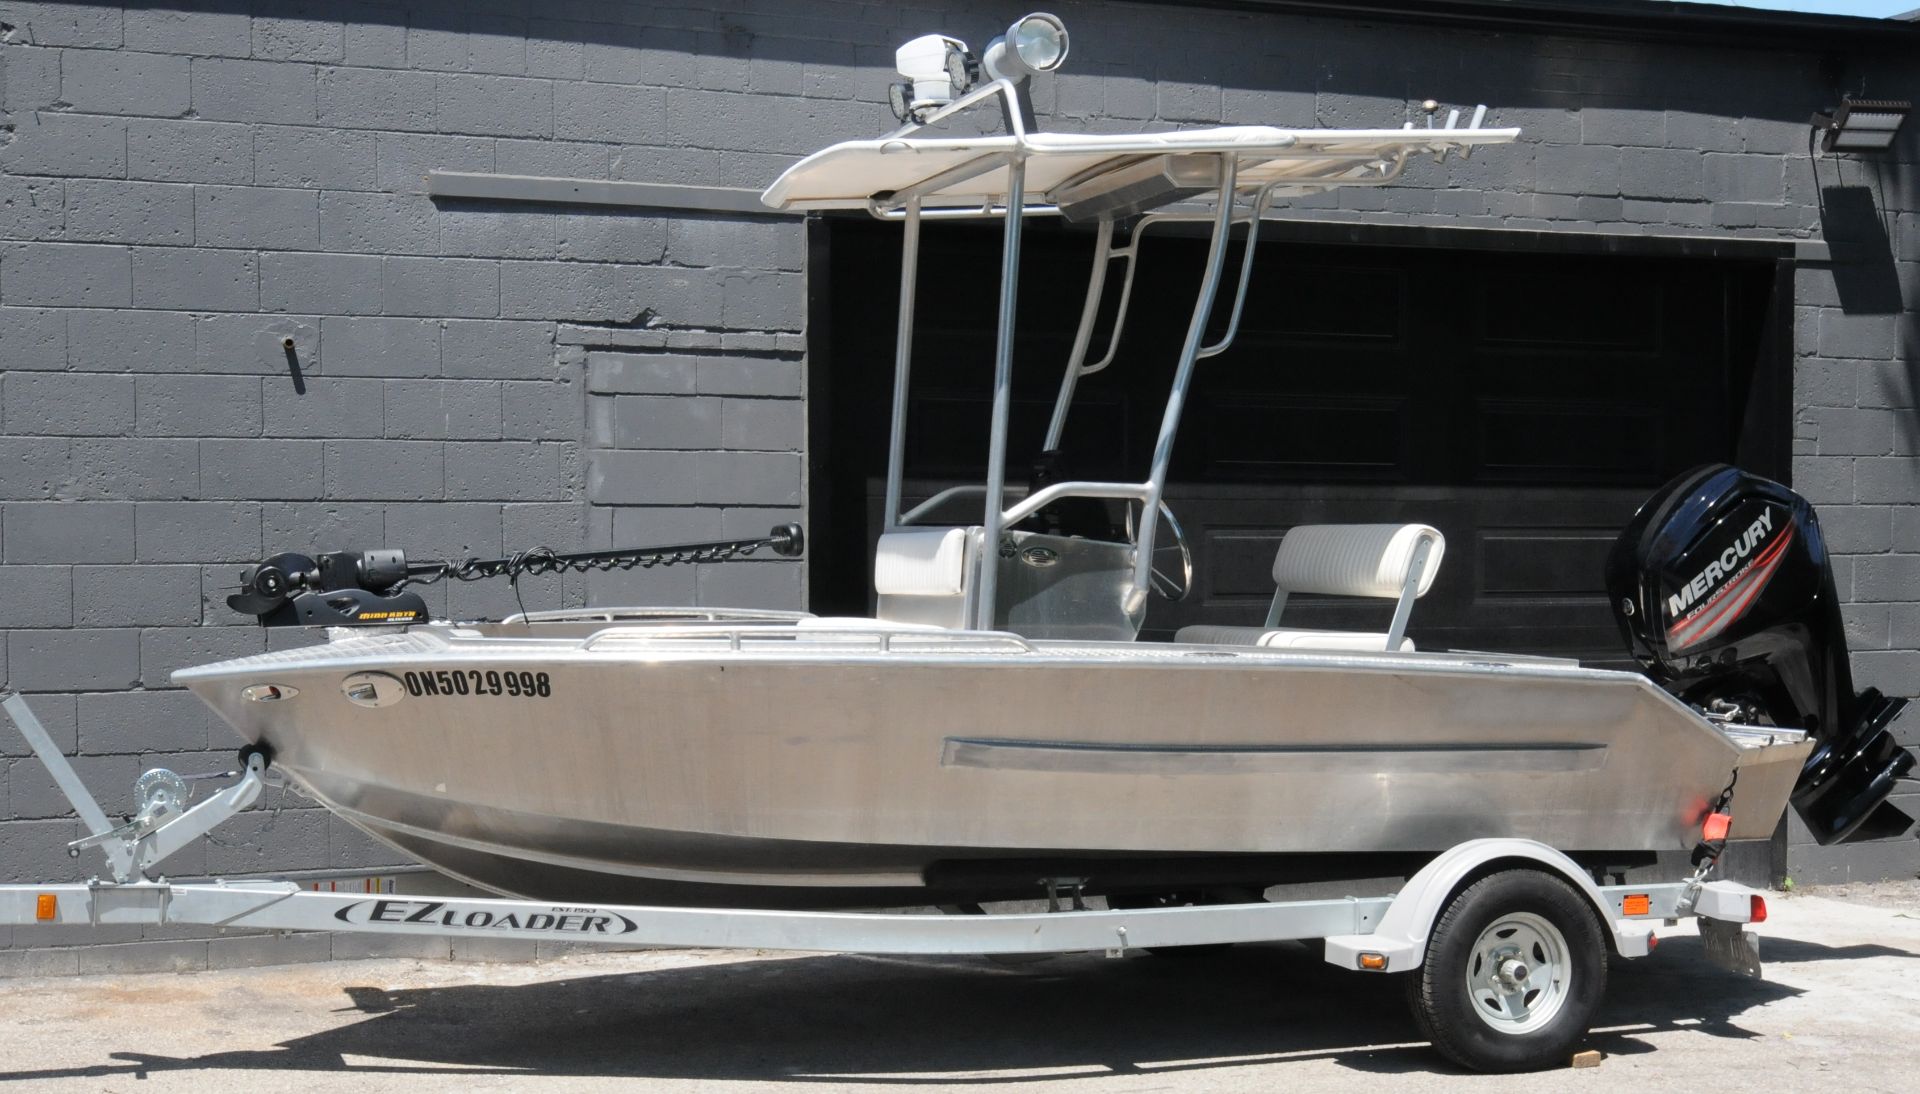 BAYVIEW BOATS (2013) PROFISHER 16 CENTER CONSOLE ALUMINUM FISHING BOAT ALL WELDED CONSTRUCTION